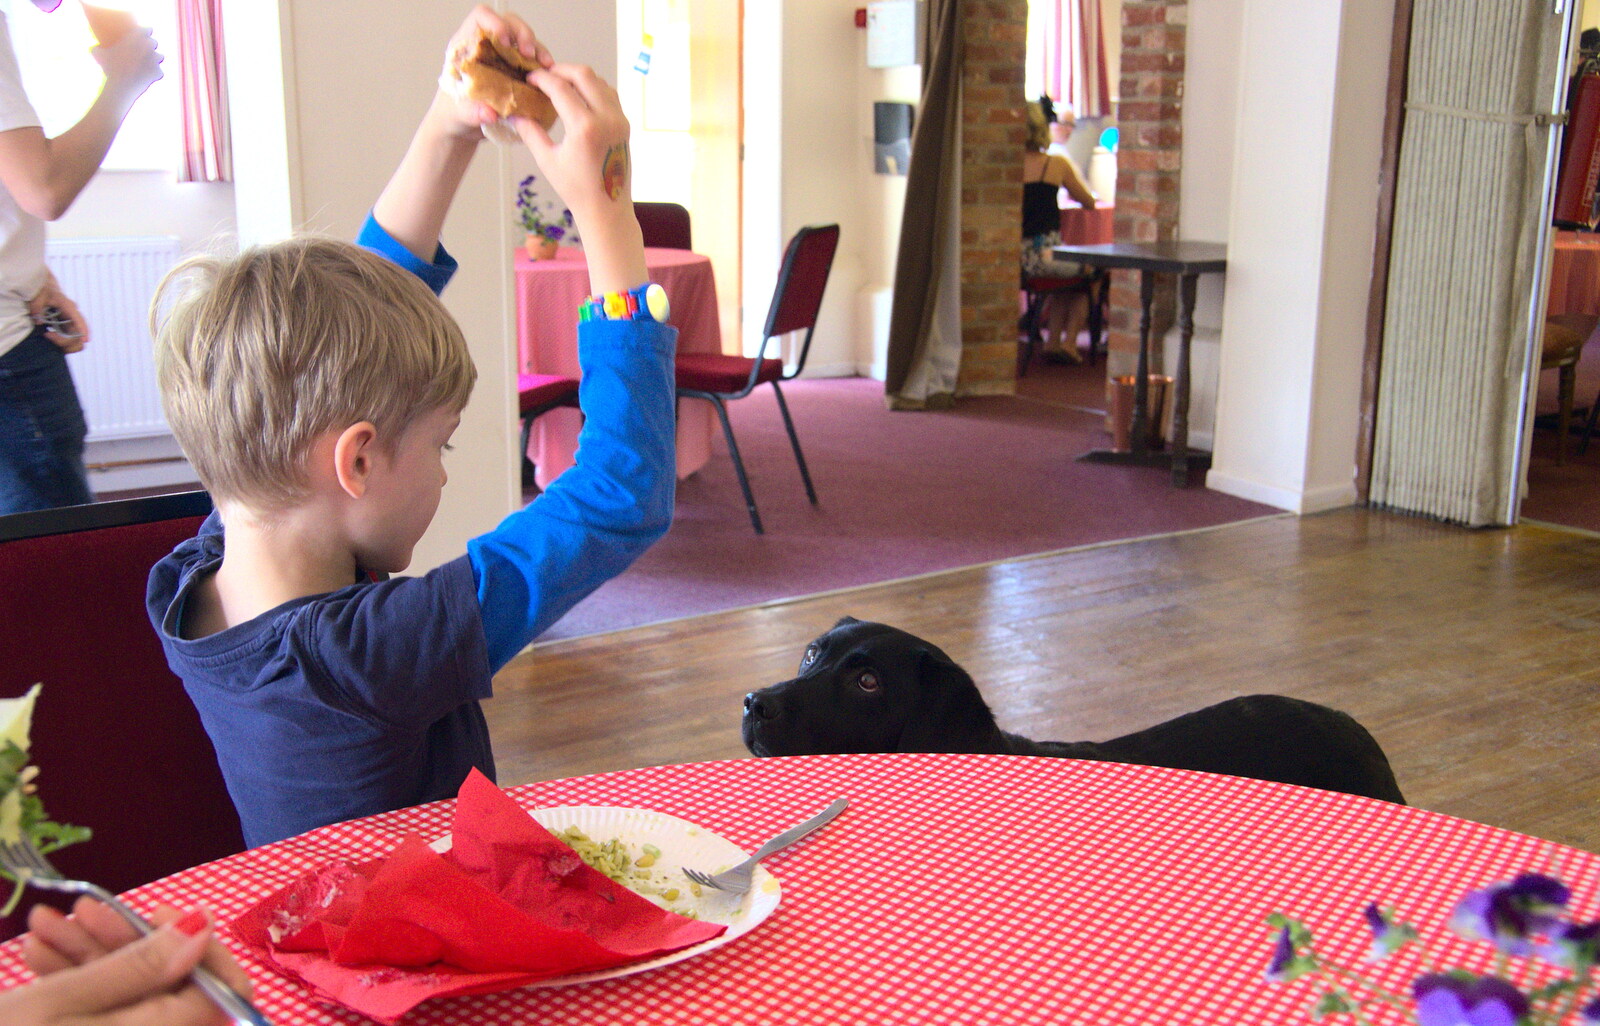 Harry hides his sausage from a keen Labrador from A Right Royal Wedding at the Village Hall, Brome, Suffolk - 19th May 2018